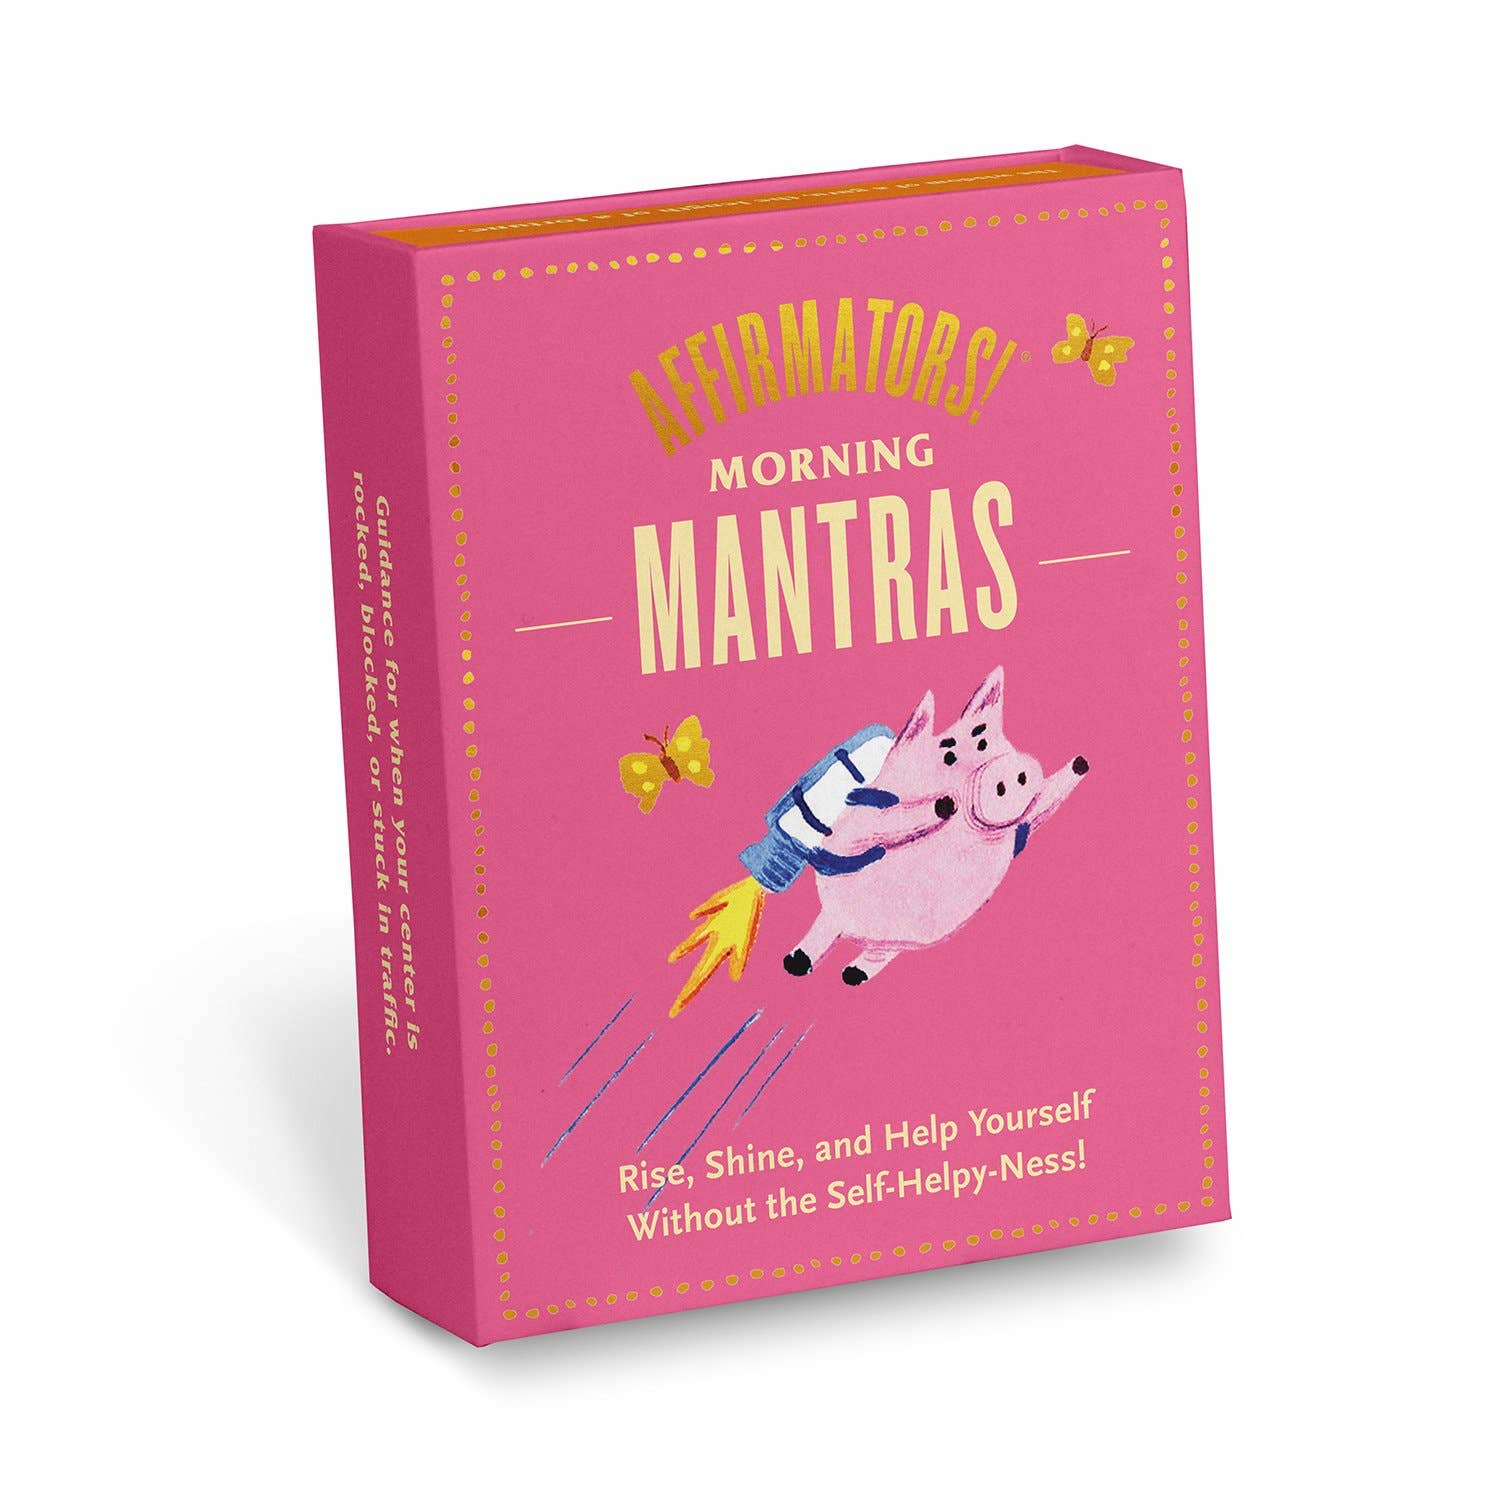 Affirmators! Morning Mantras | Deck to Help You Help Yourself - without the Self-Helpy Ness! - Spiral Circle